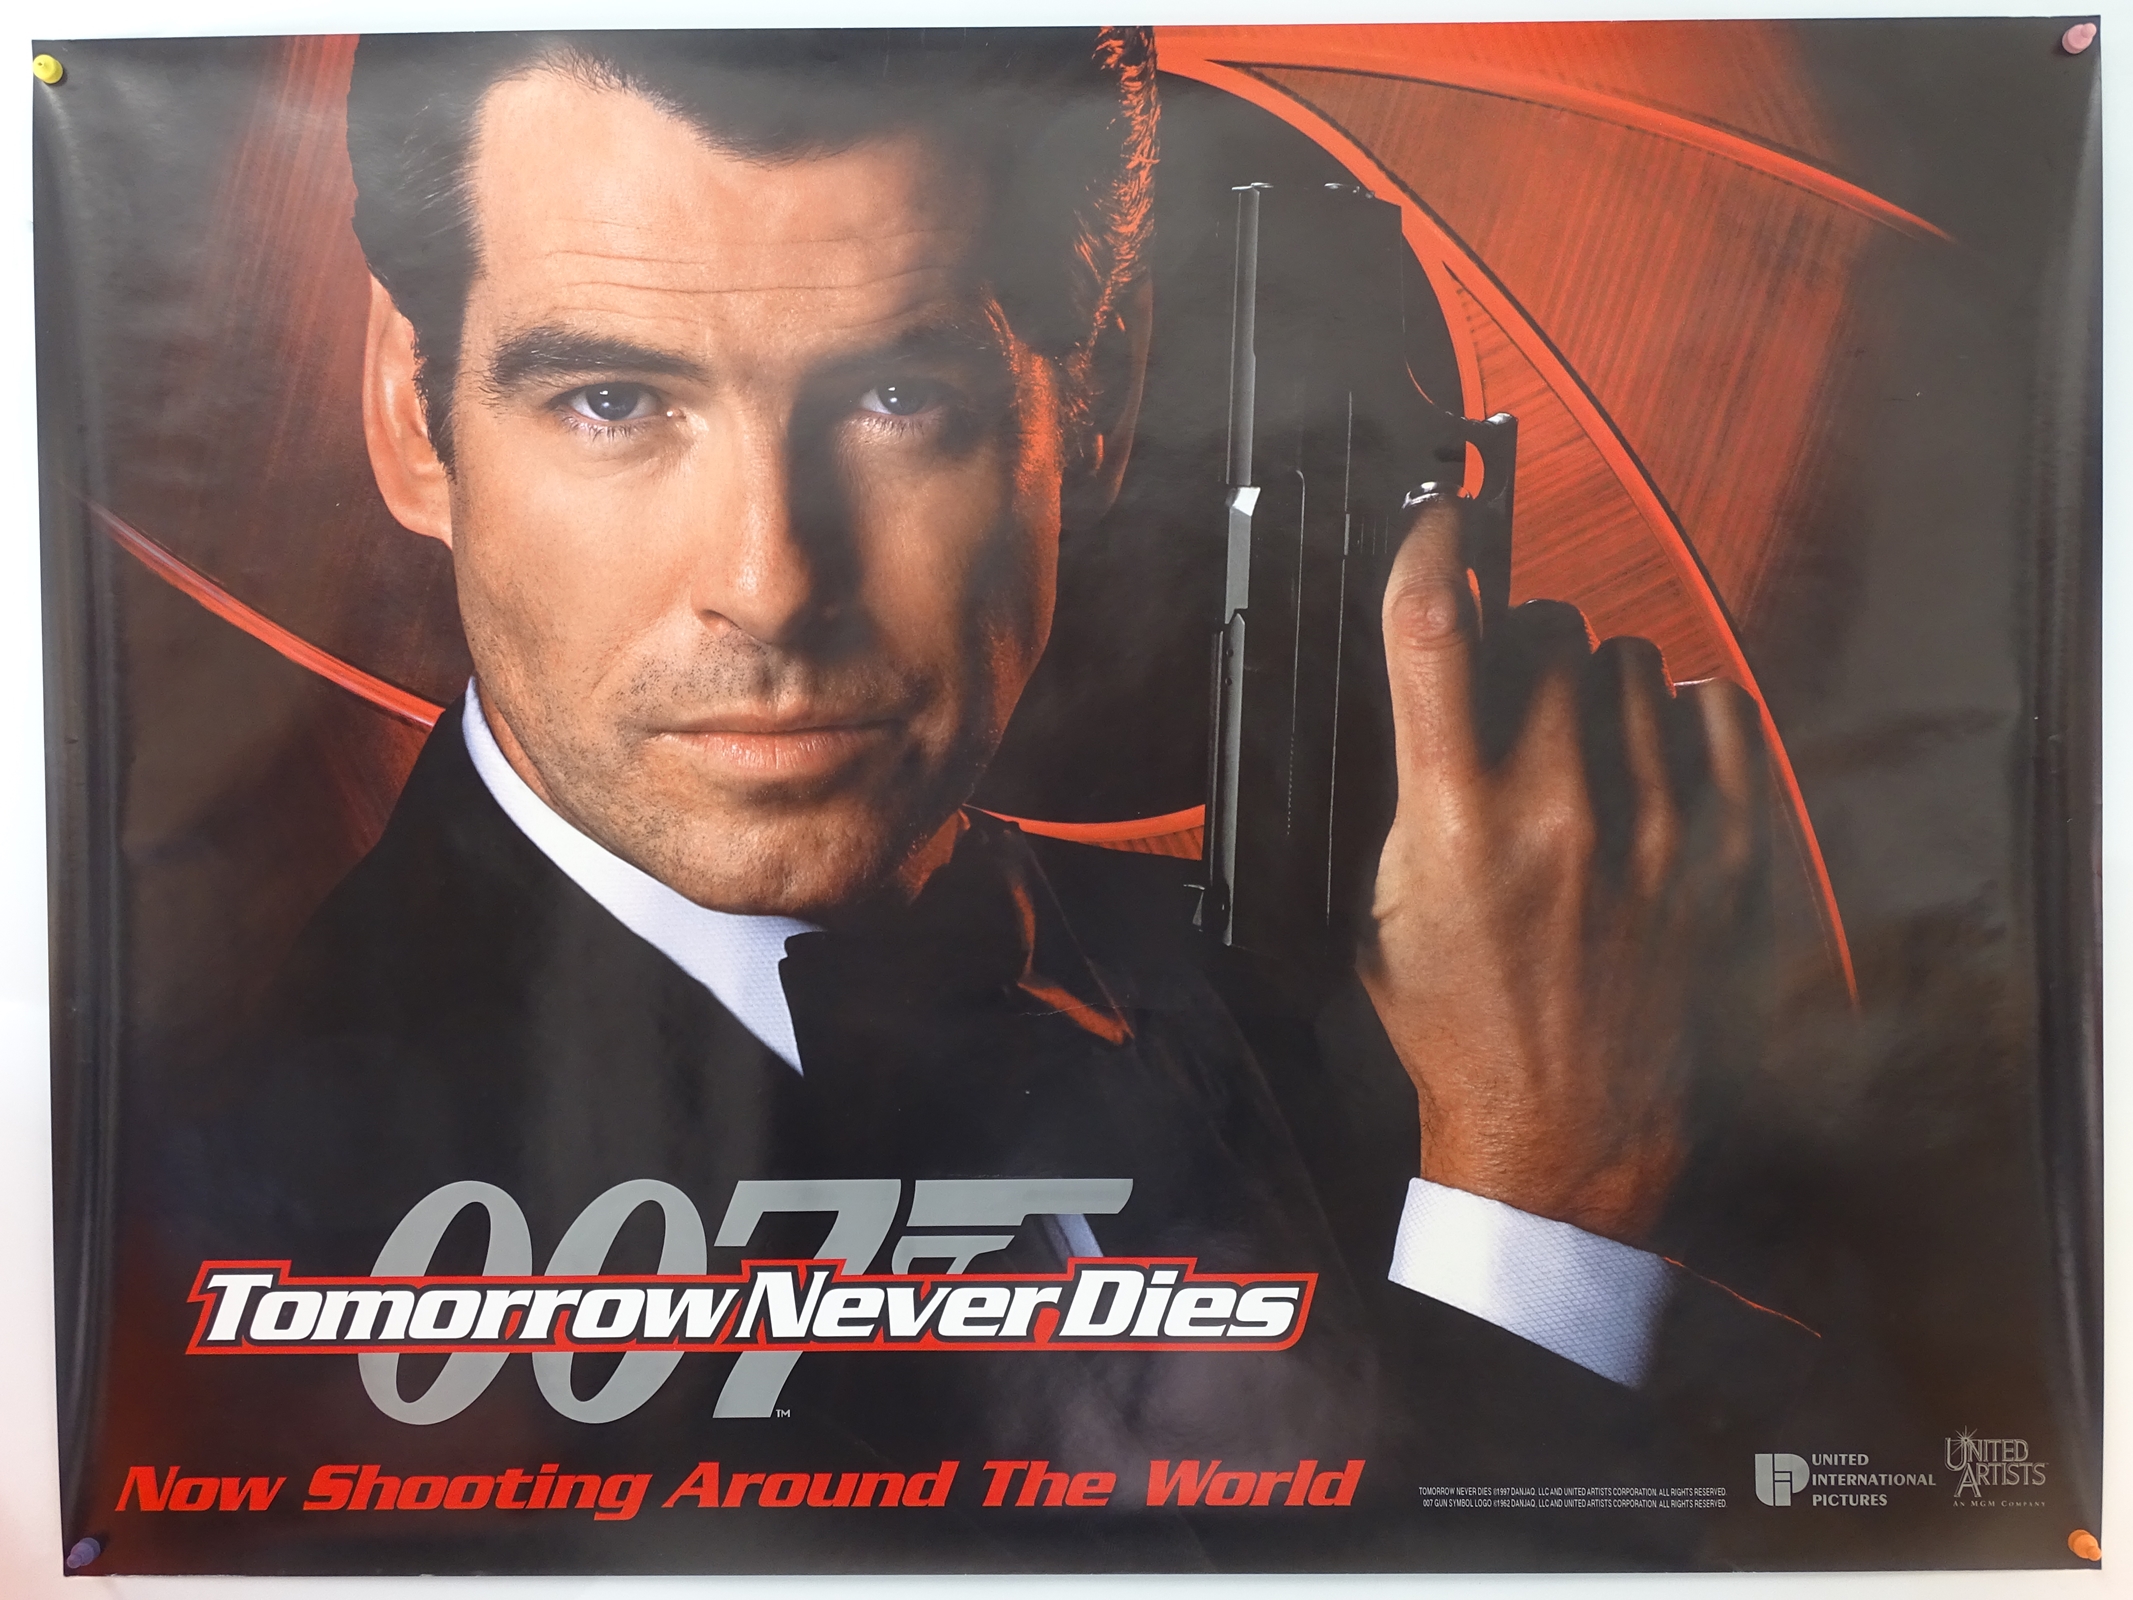 JAMES BOND: TOMORROW NEVER DIES (1997) Lot of 2 Br - Image 2 of 3